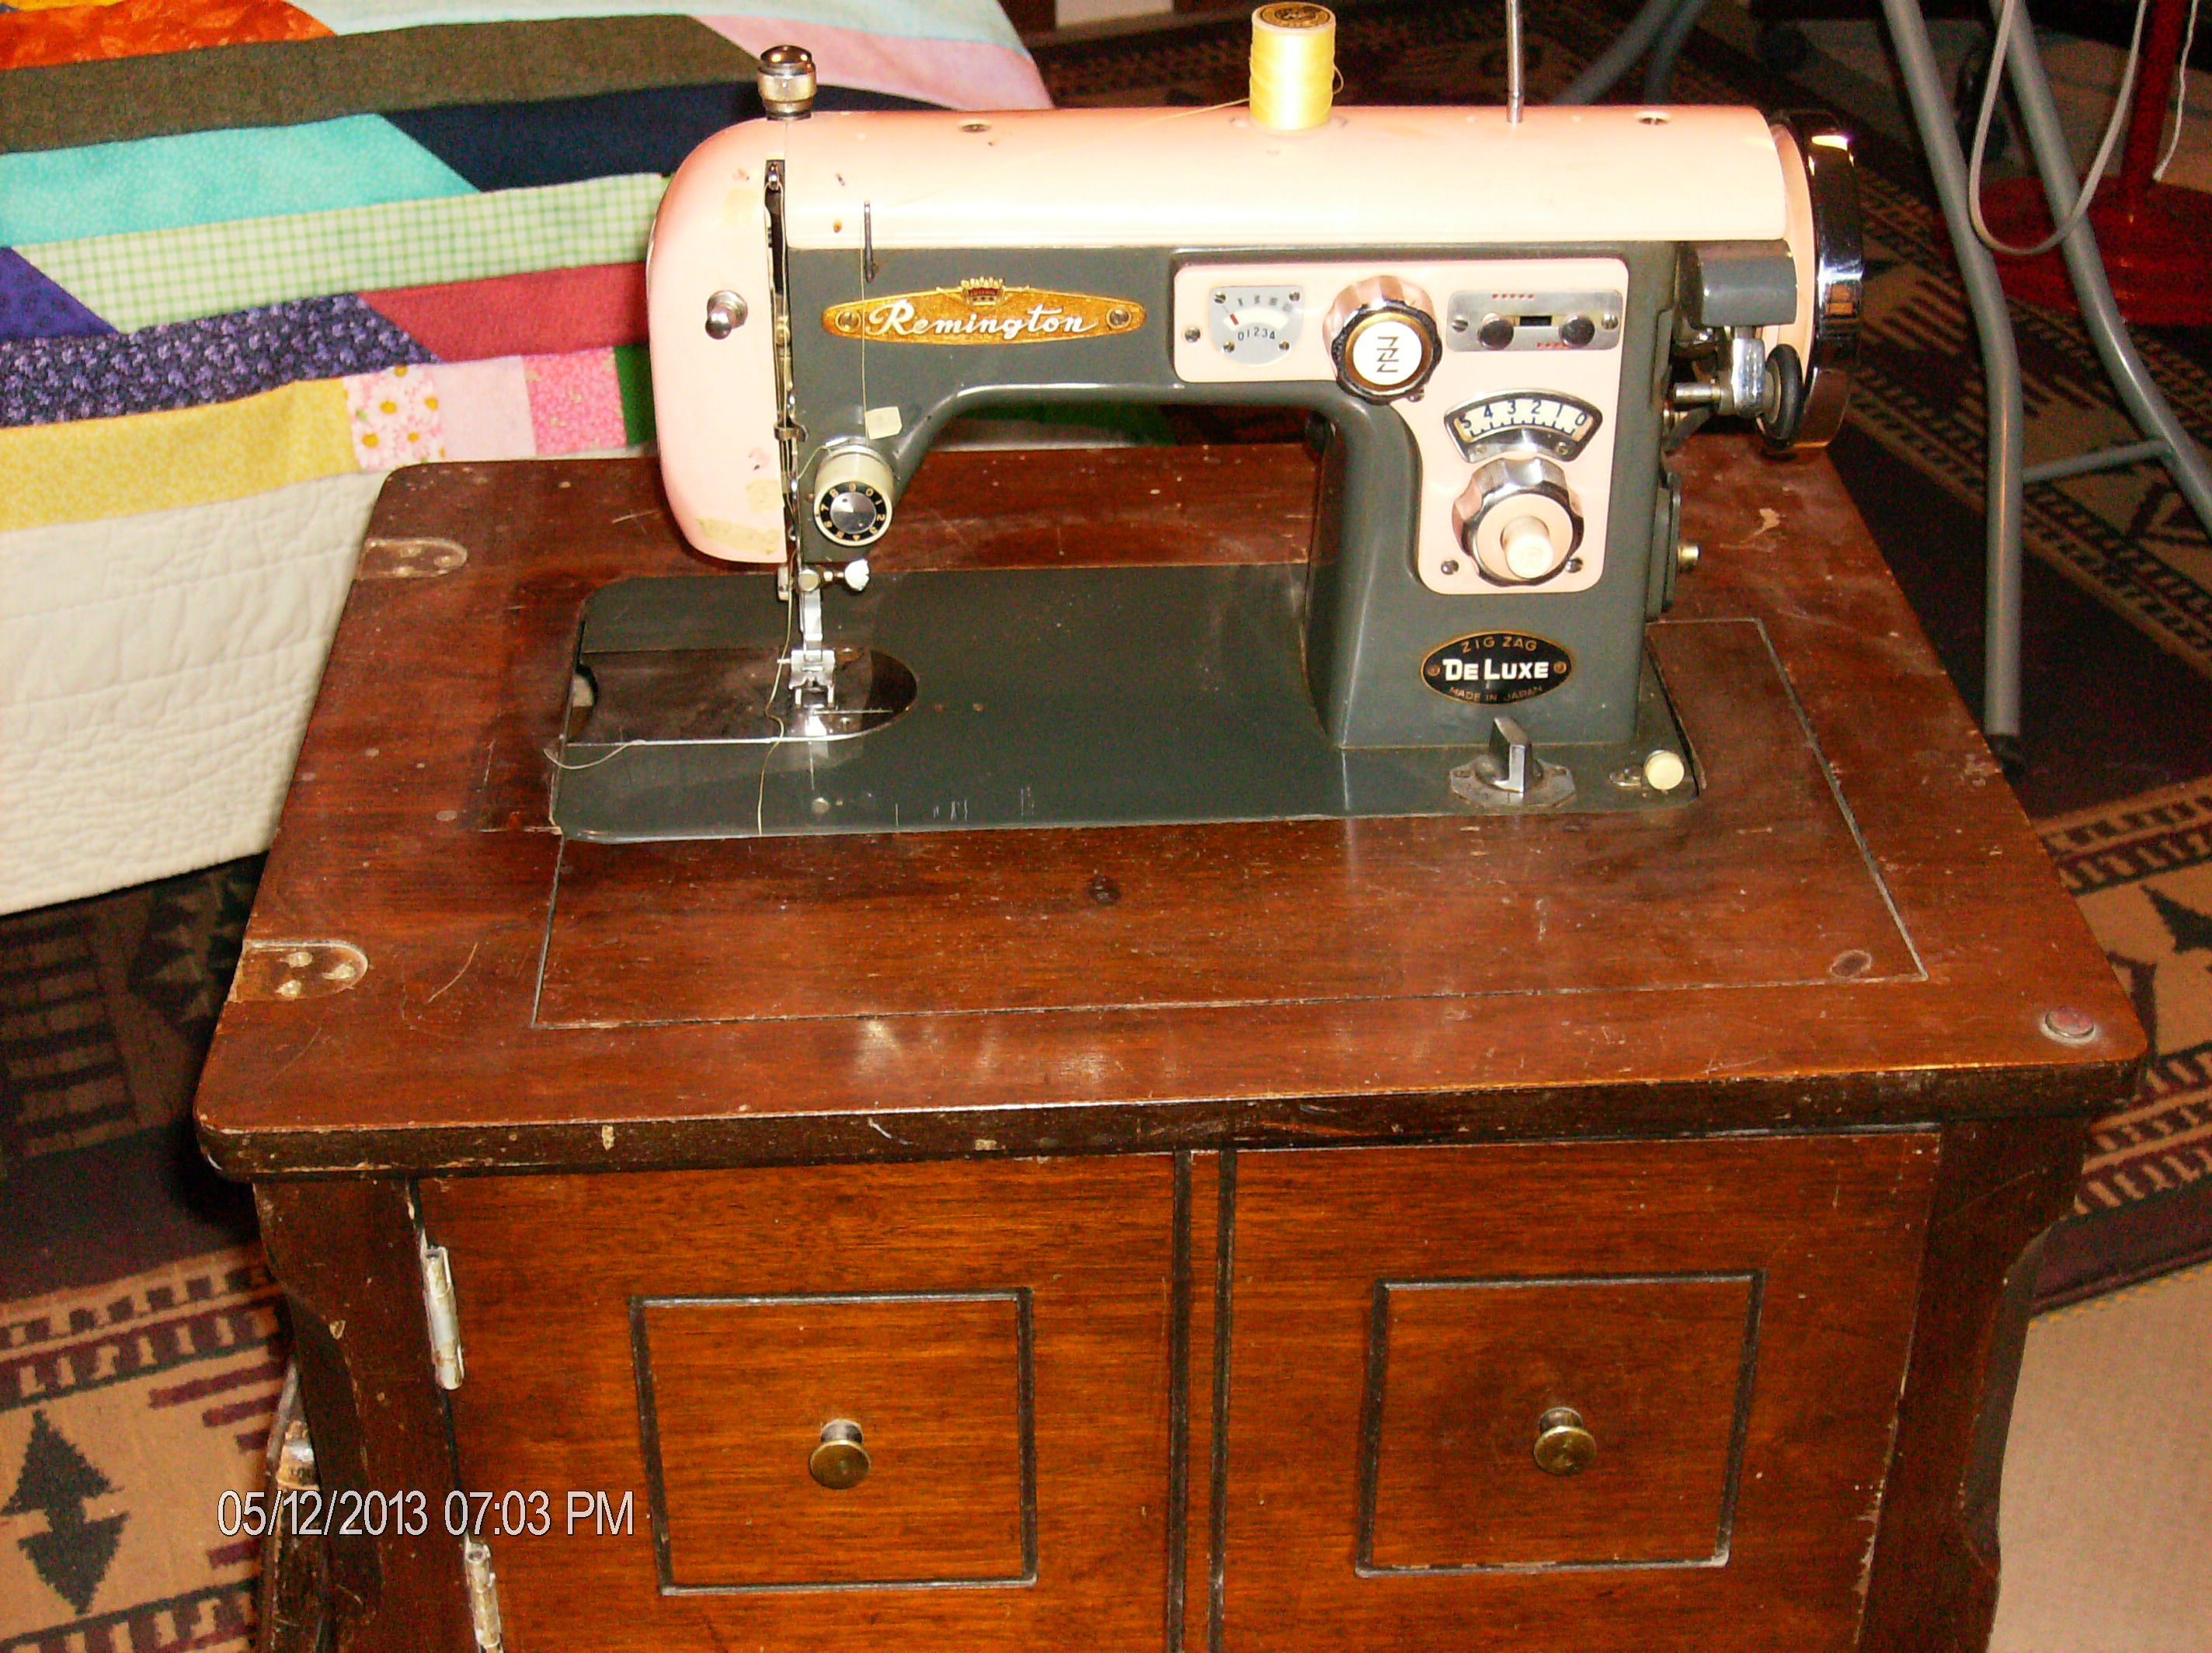 Remington sewing machine - Quiltingboard Forums